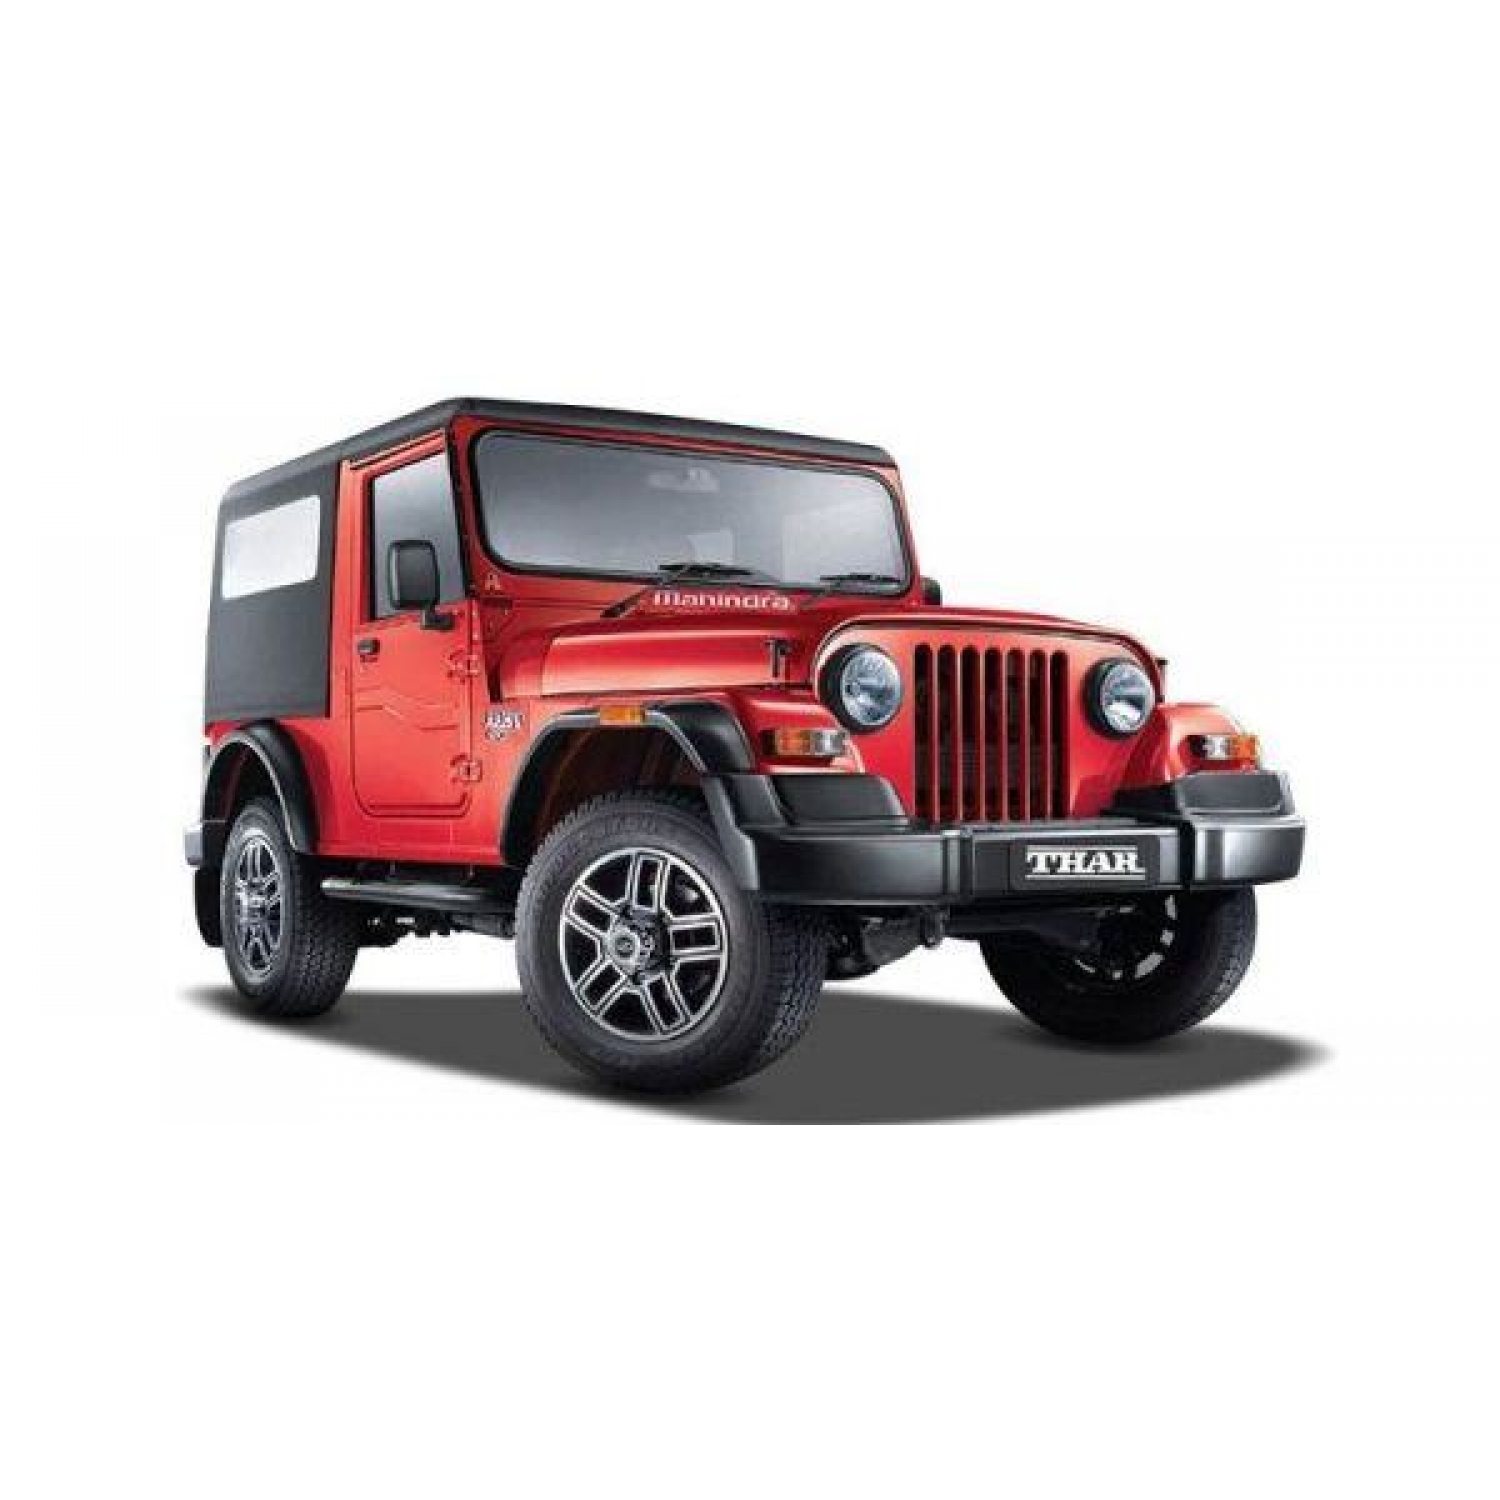 Buy Mahindra Thar Accessories and Parts Online at Discounted Price